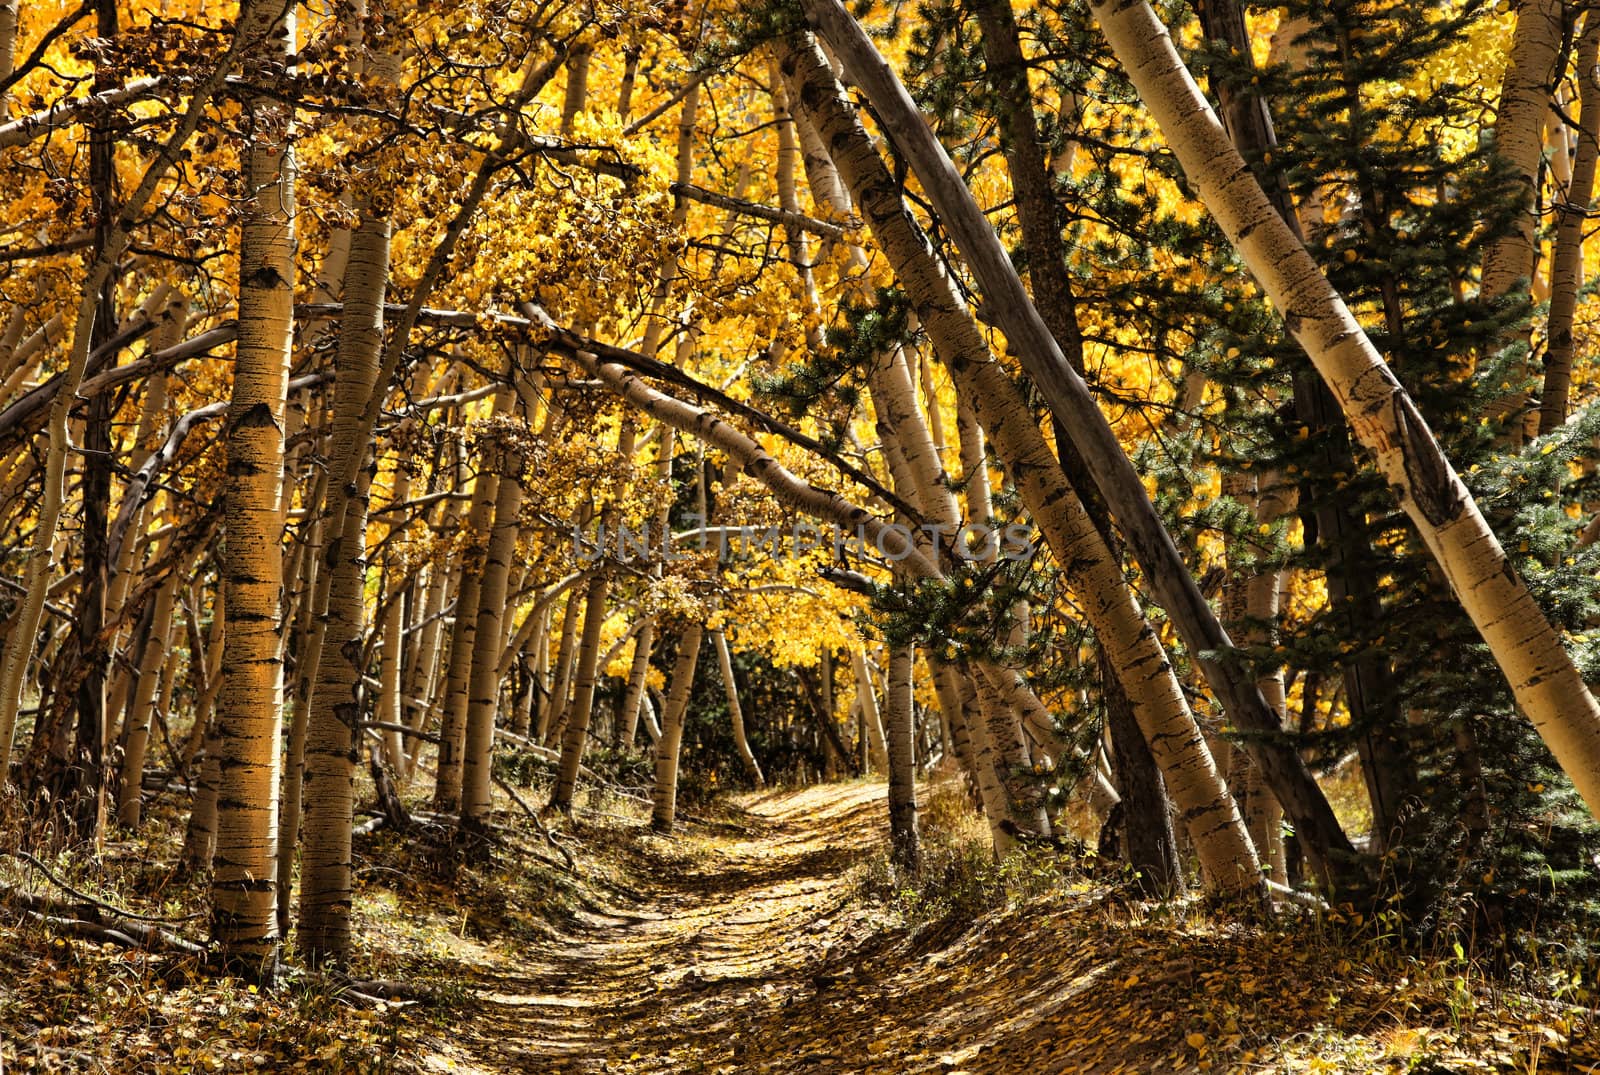 Autumn sunset lights up aspen forest archway and path with amazing golden glow